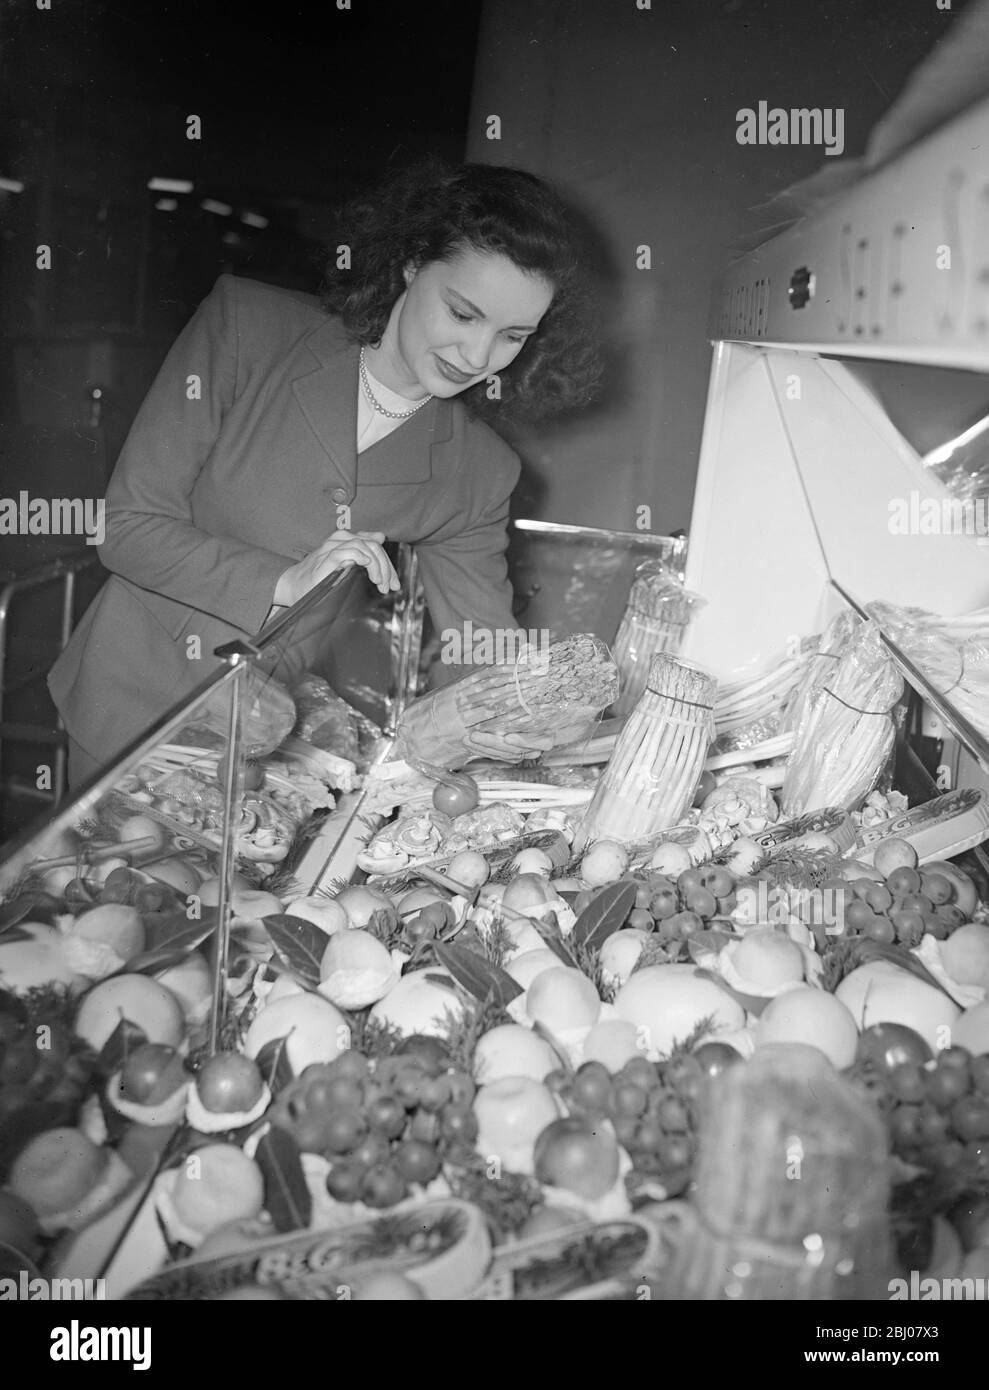 The Hotel, Restaurant and Catering Exhibition, opened at Olympia today by Mr Harold Wilson, President of the Board of Trade, shows many advantages in the preparation of food, brought about by the introduction of science in the kitchen. - New electrical appliances and the introduction from America of frozen meals are features of the exhibition. - Picture shows: Miss Helen Flaxman admires the display of frosted vegetables and fruit, featured at the Hotel, Restaurant and Catering Exhibition at Olympia today. - 16 January 1948 Stock Photo